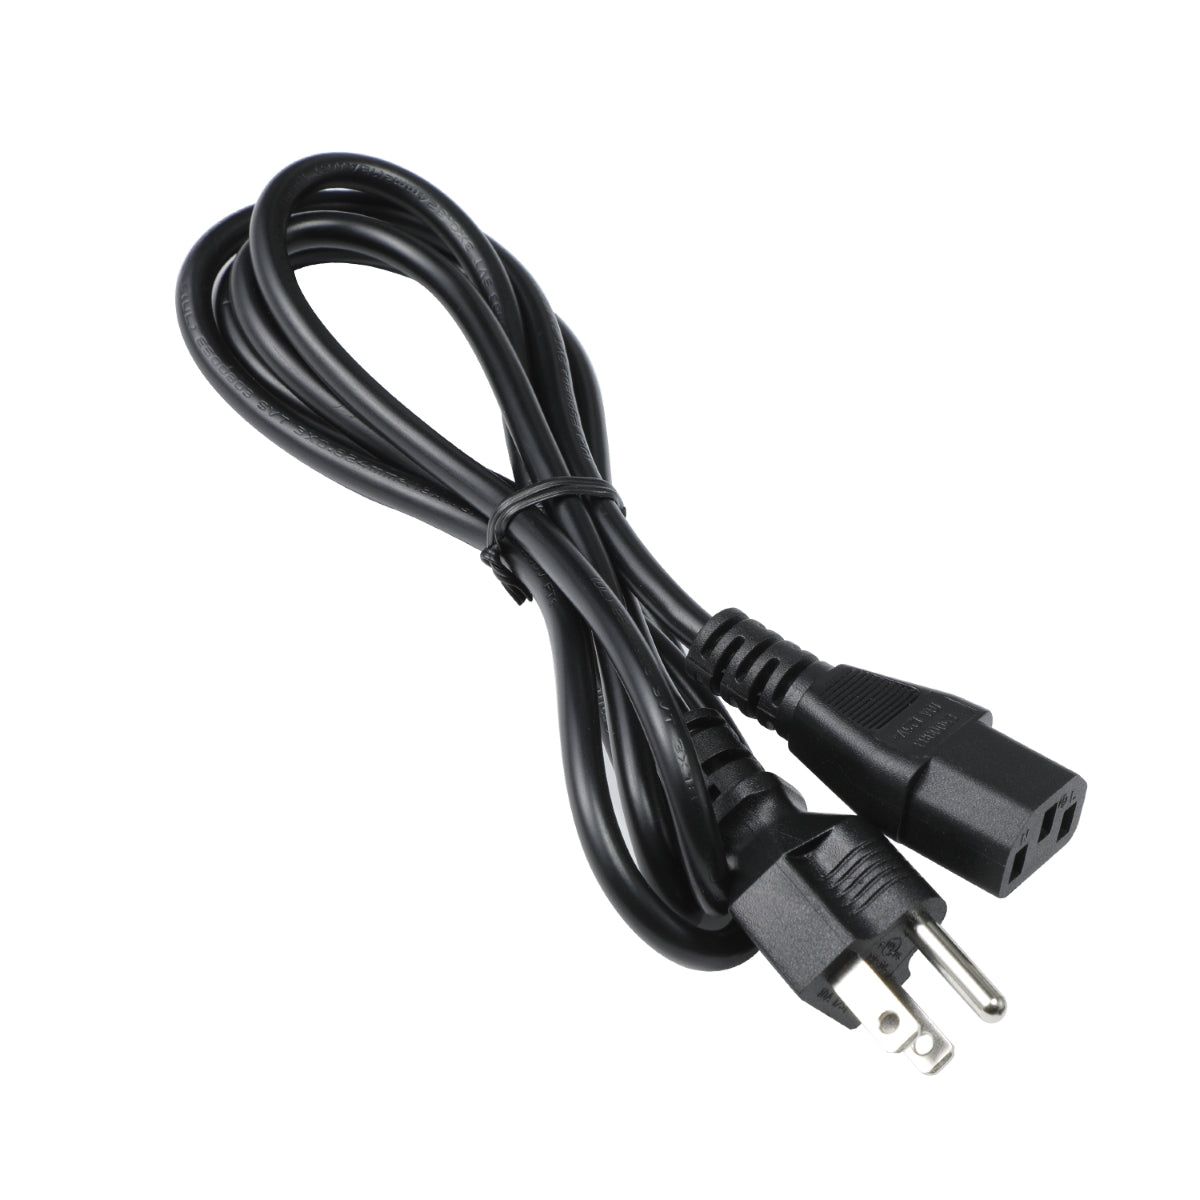 Power Cord for BenQ ZOWIE RL2755T e-Sports Monitor.